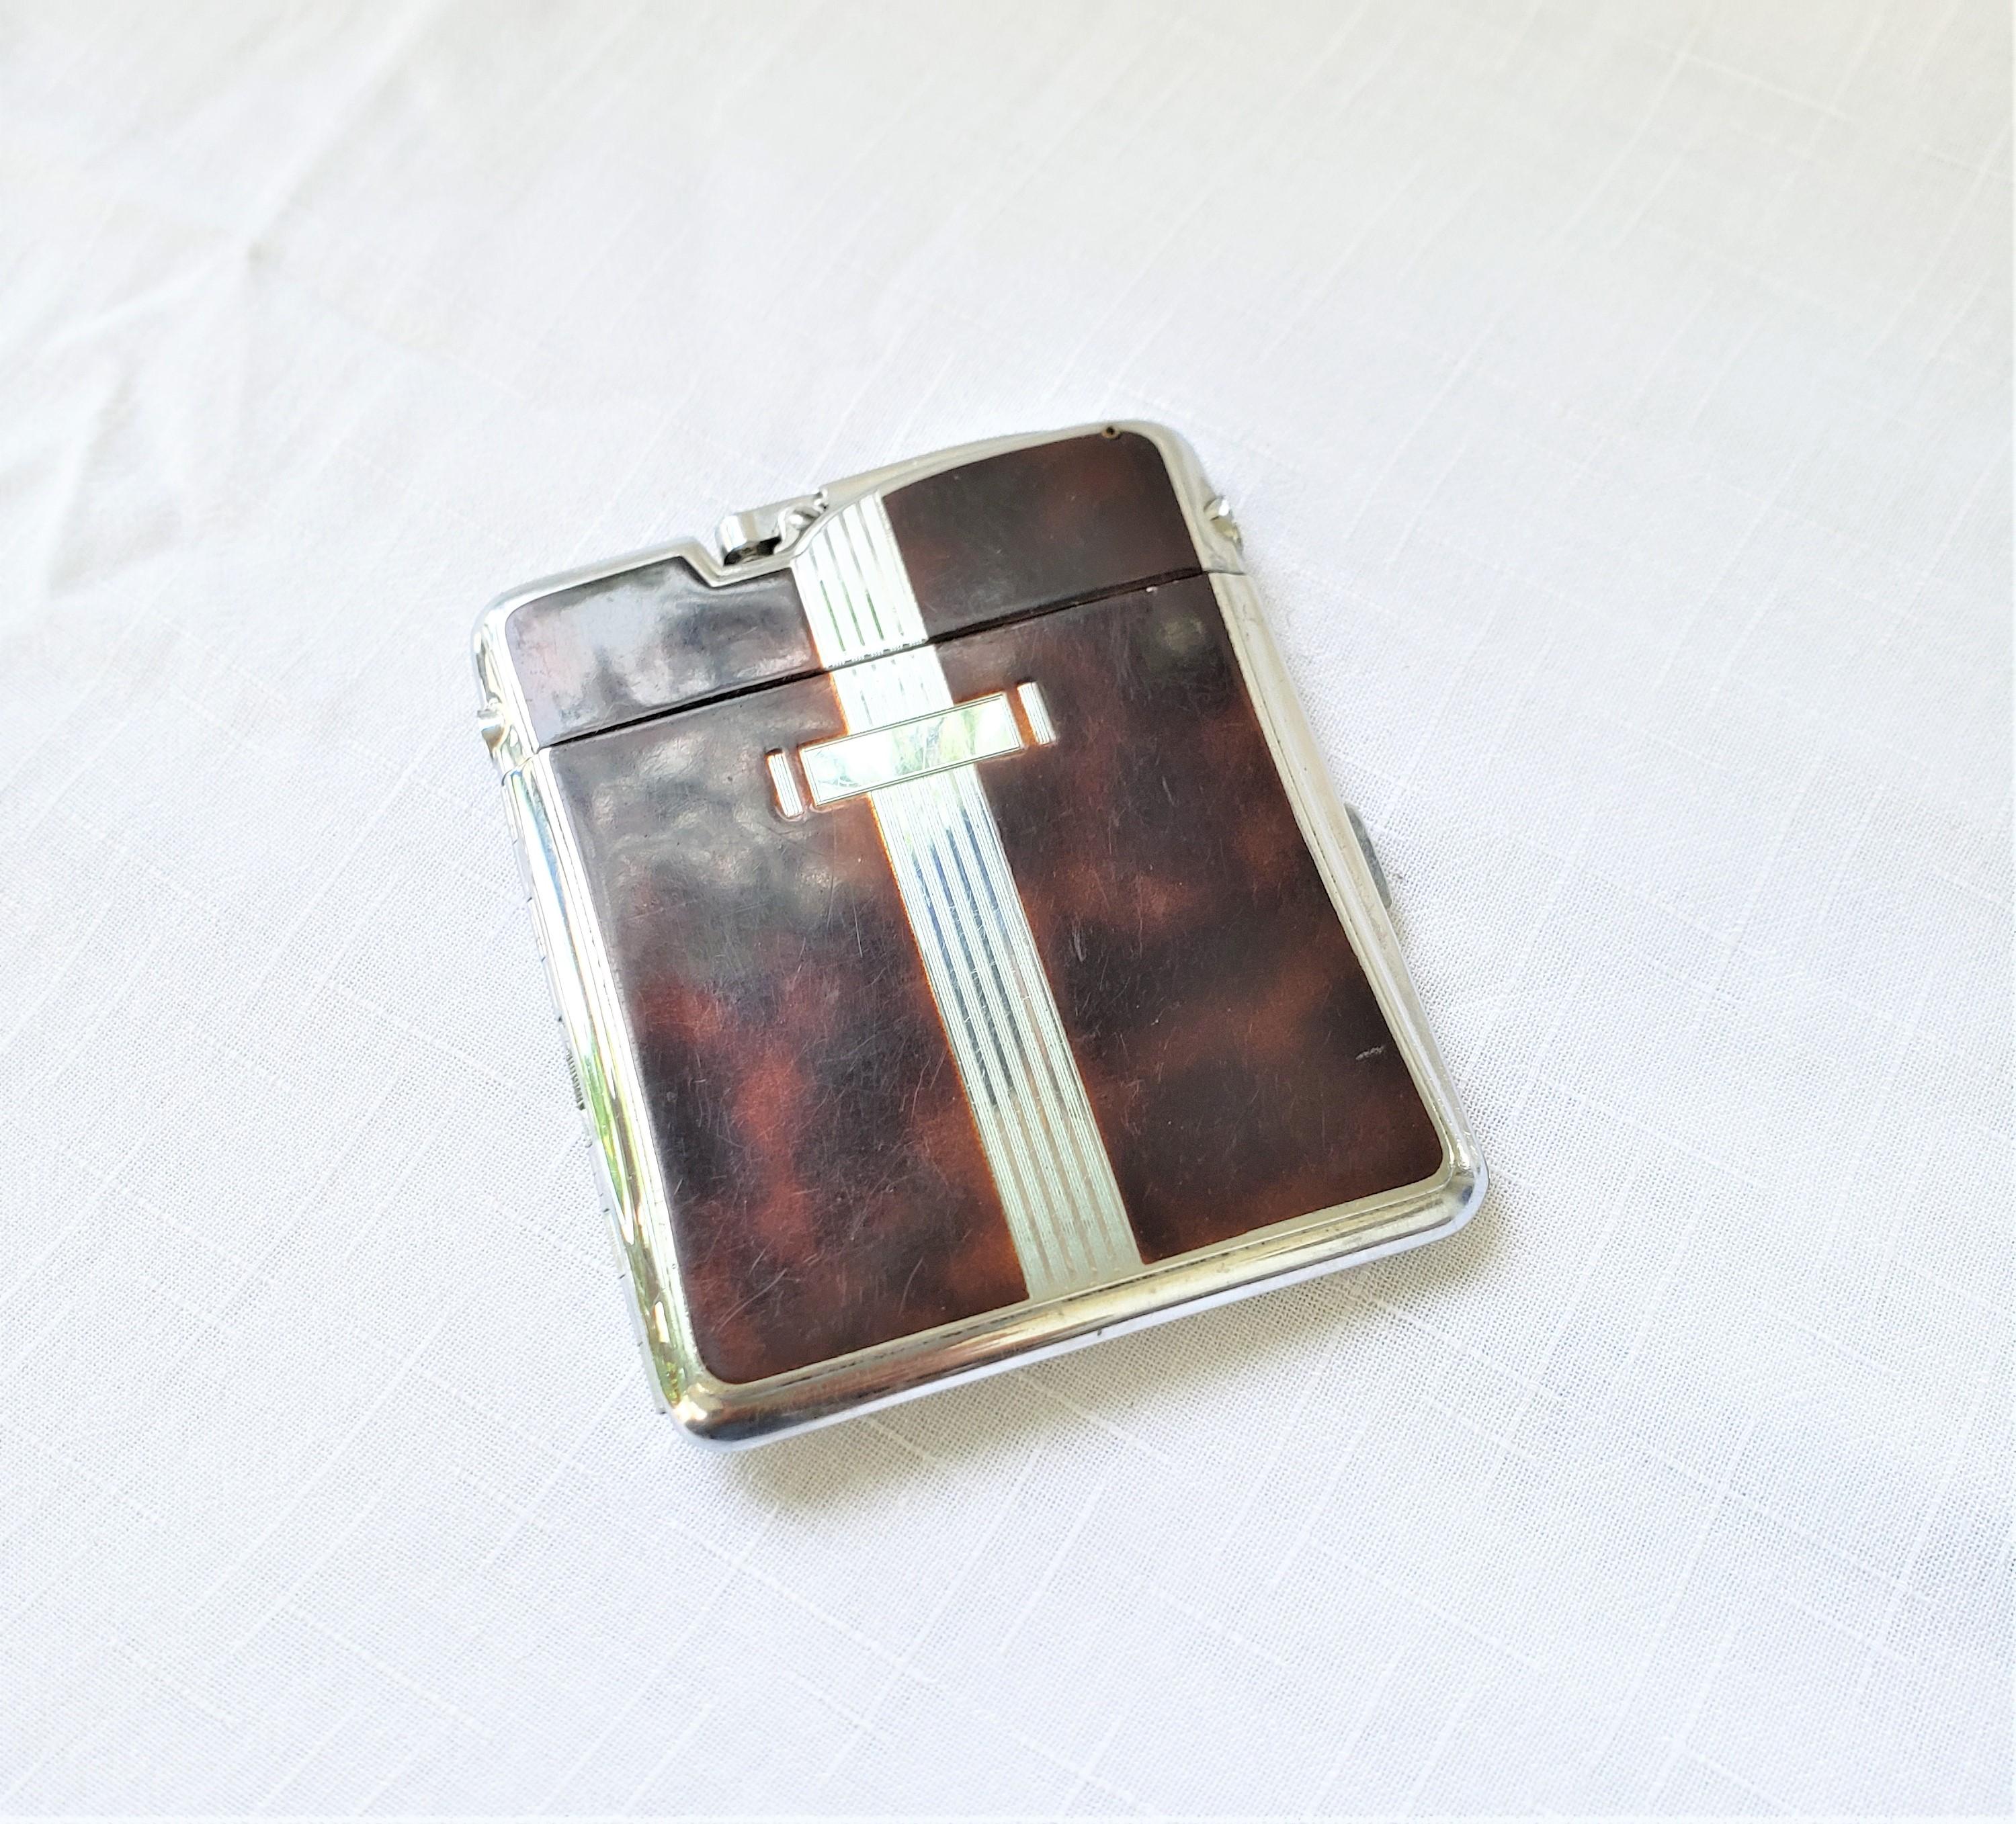 This vintage combination cigarette case and lighter was made by the well known Ronson's Dominion Art Metal Works division and dates to approximately 1965 and done in the period Mid-Century Modern style. The case and lighter are composed of chrome